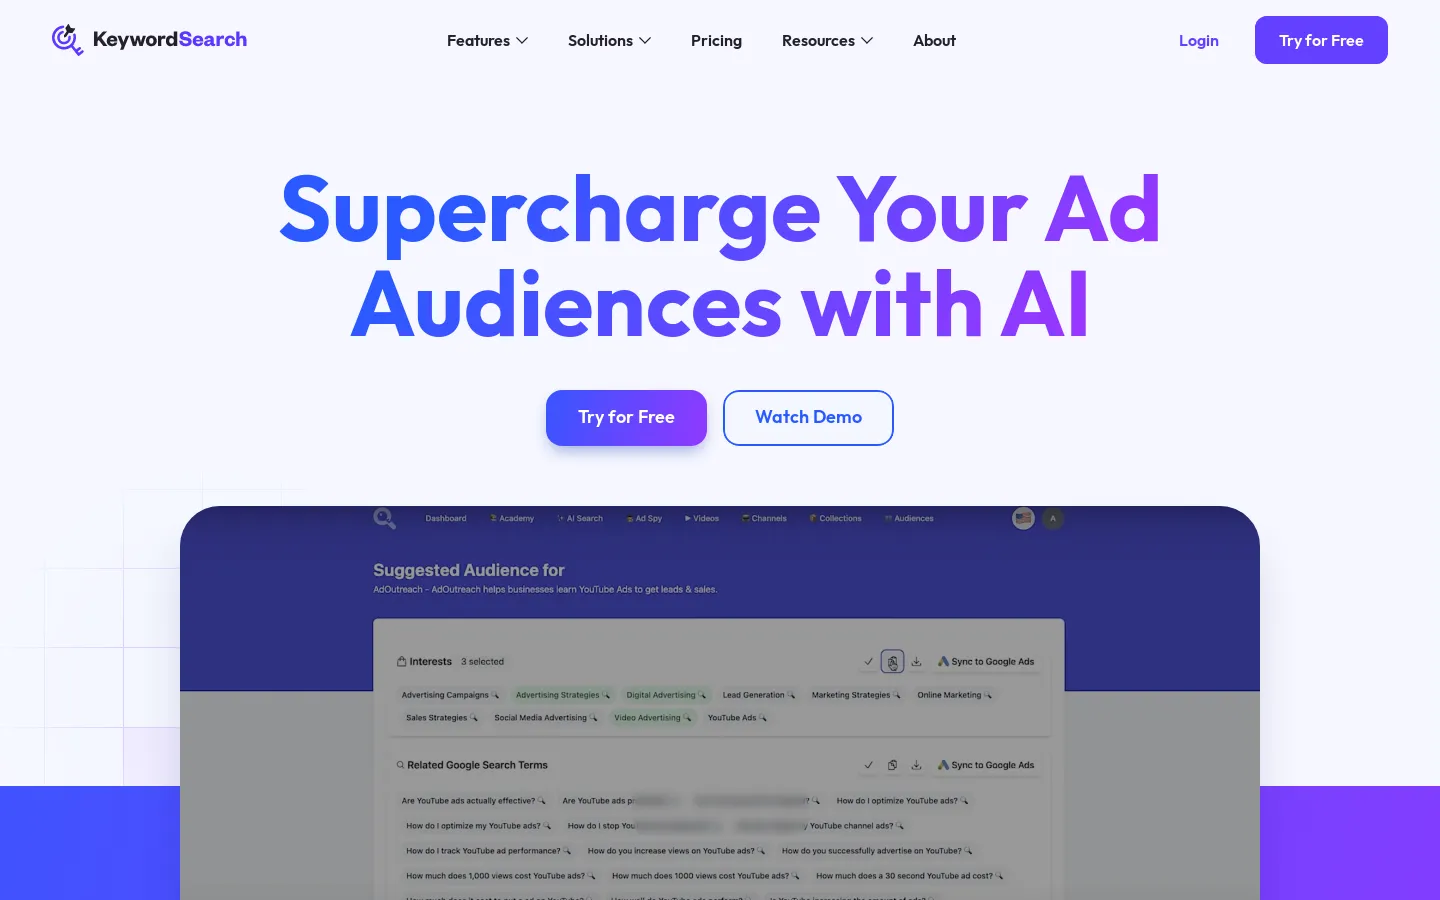 KeywordSearch - SuperCharge Ad Audiences with AI